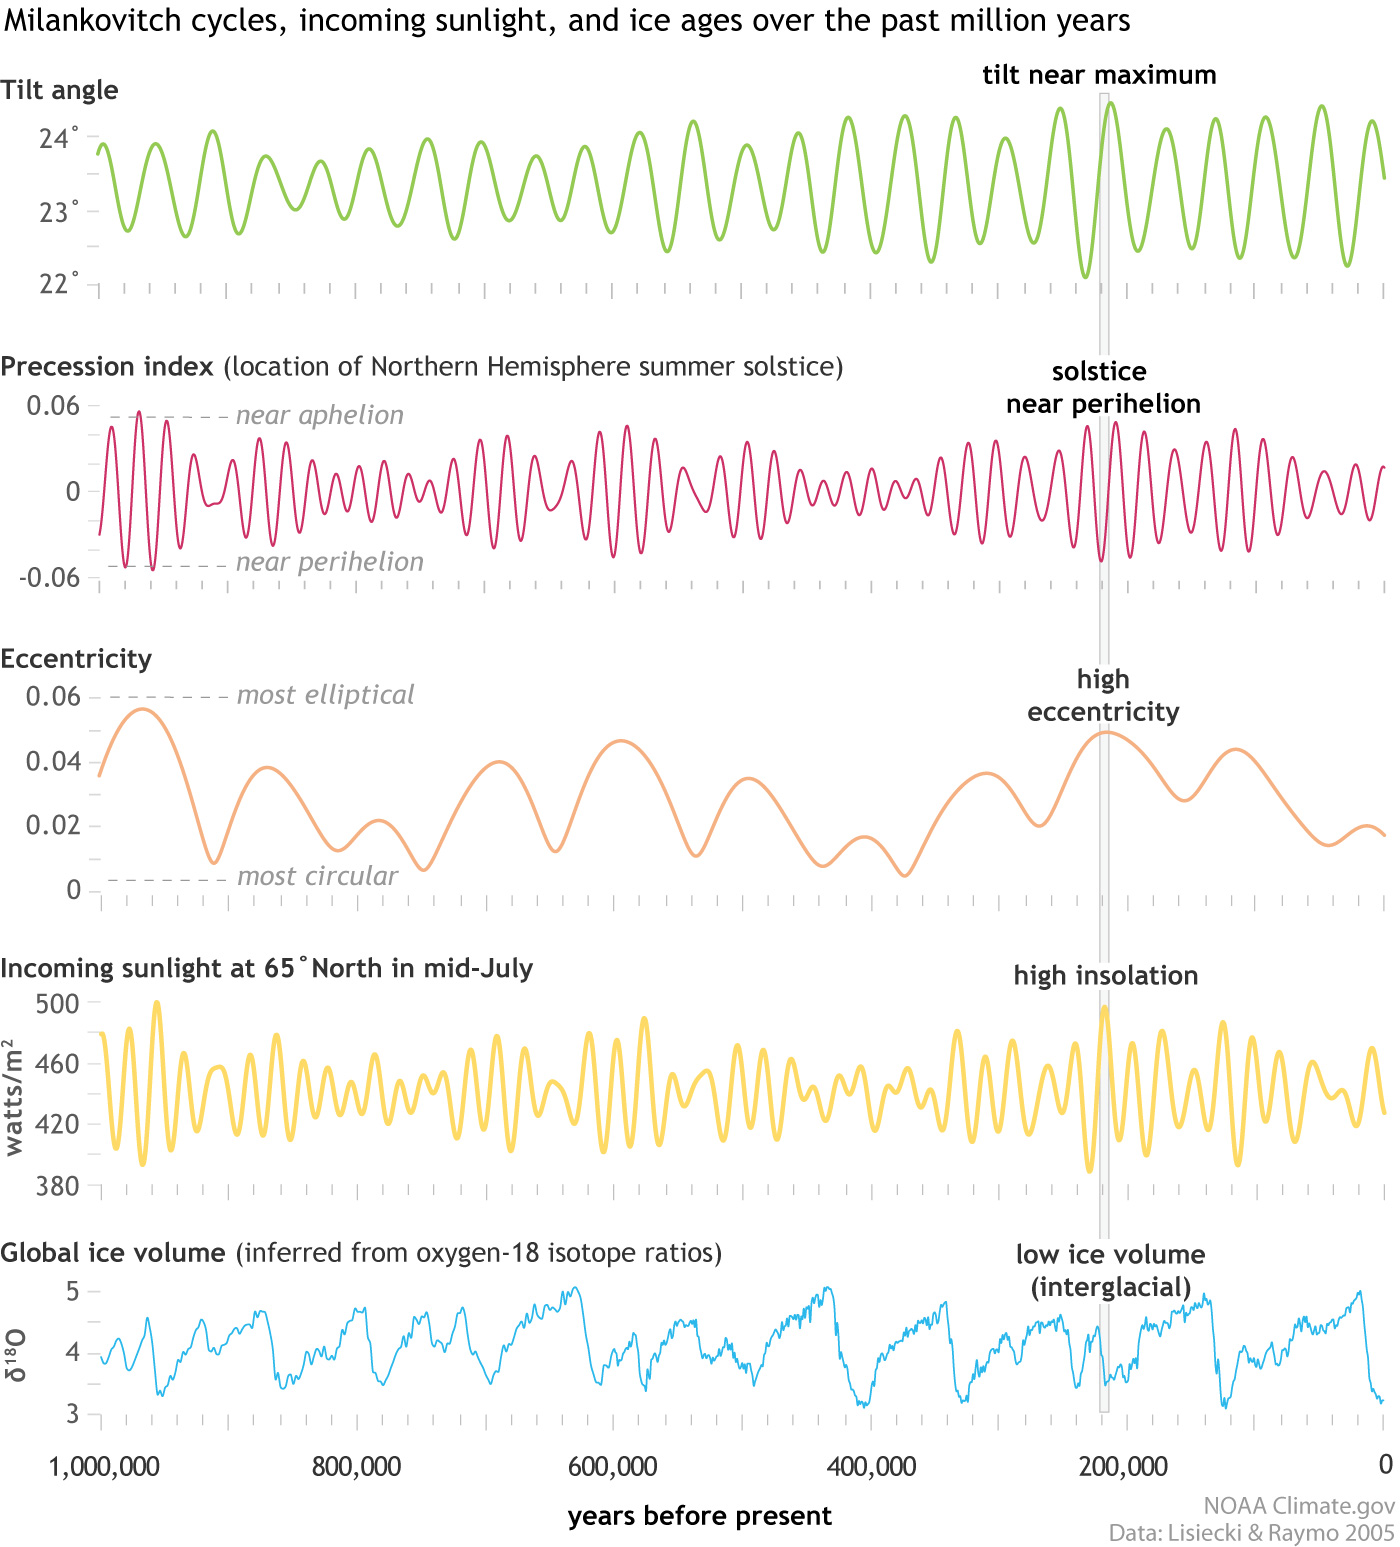 Five graphs, arranged in rows, showing Milankovitch cycles, incoming sunlight, and global ice volume over the past million years